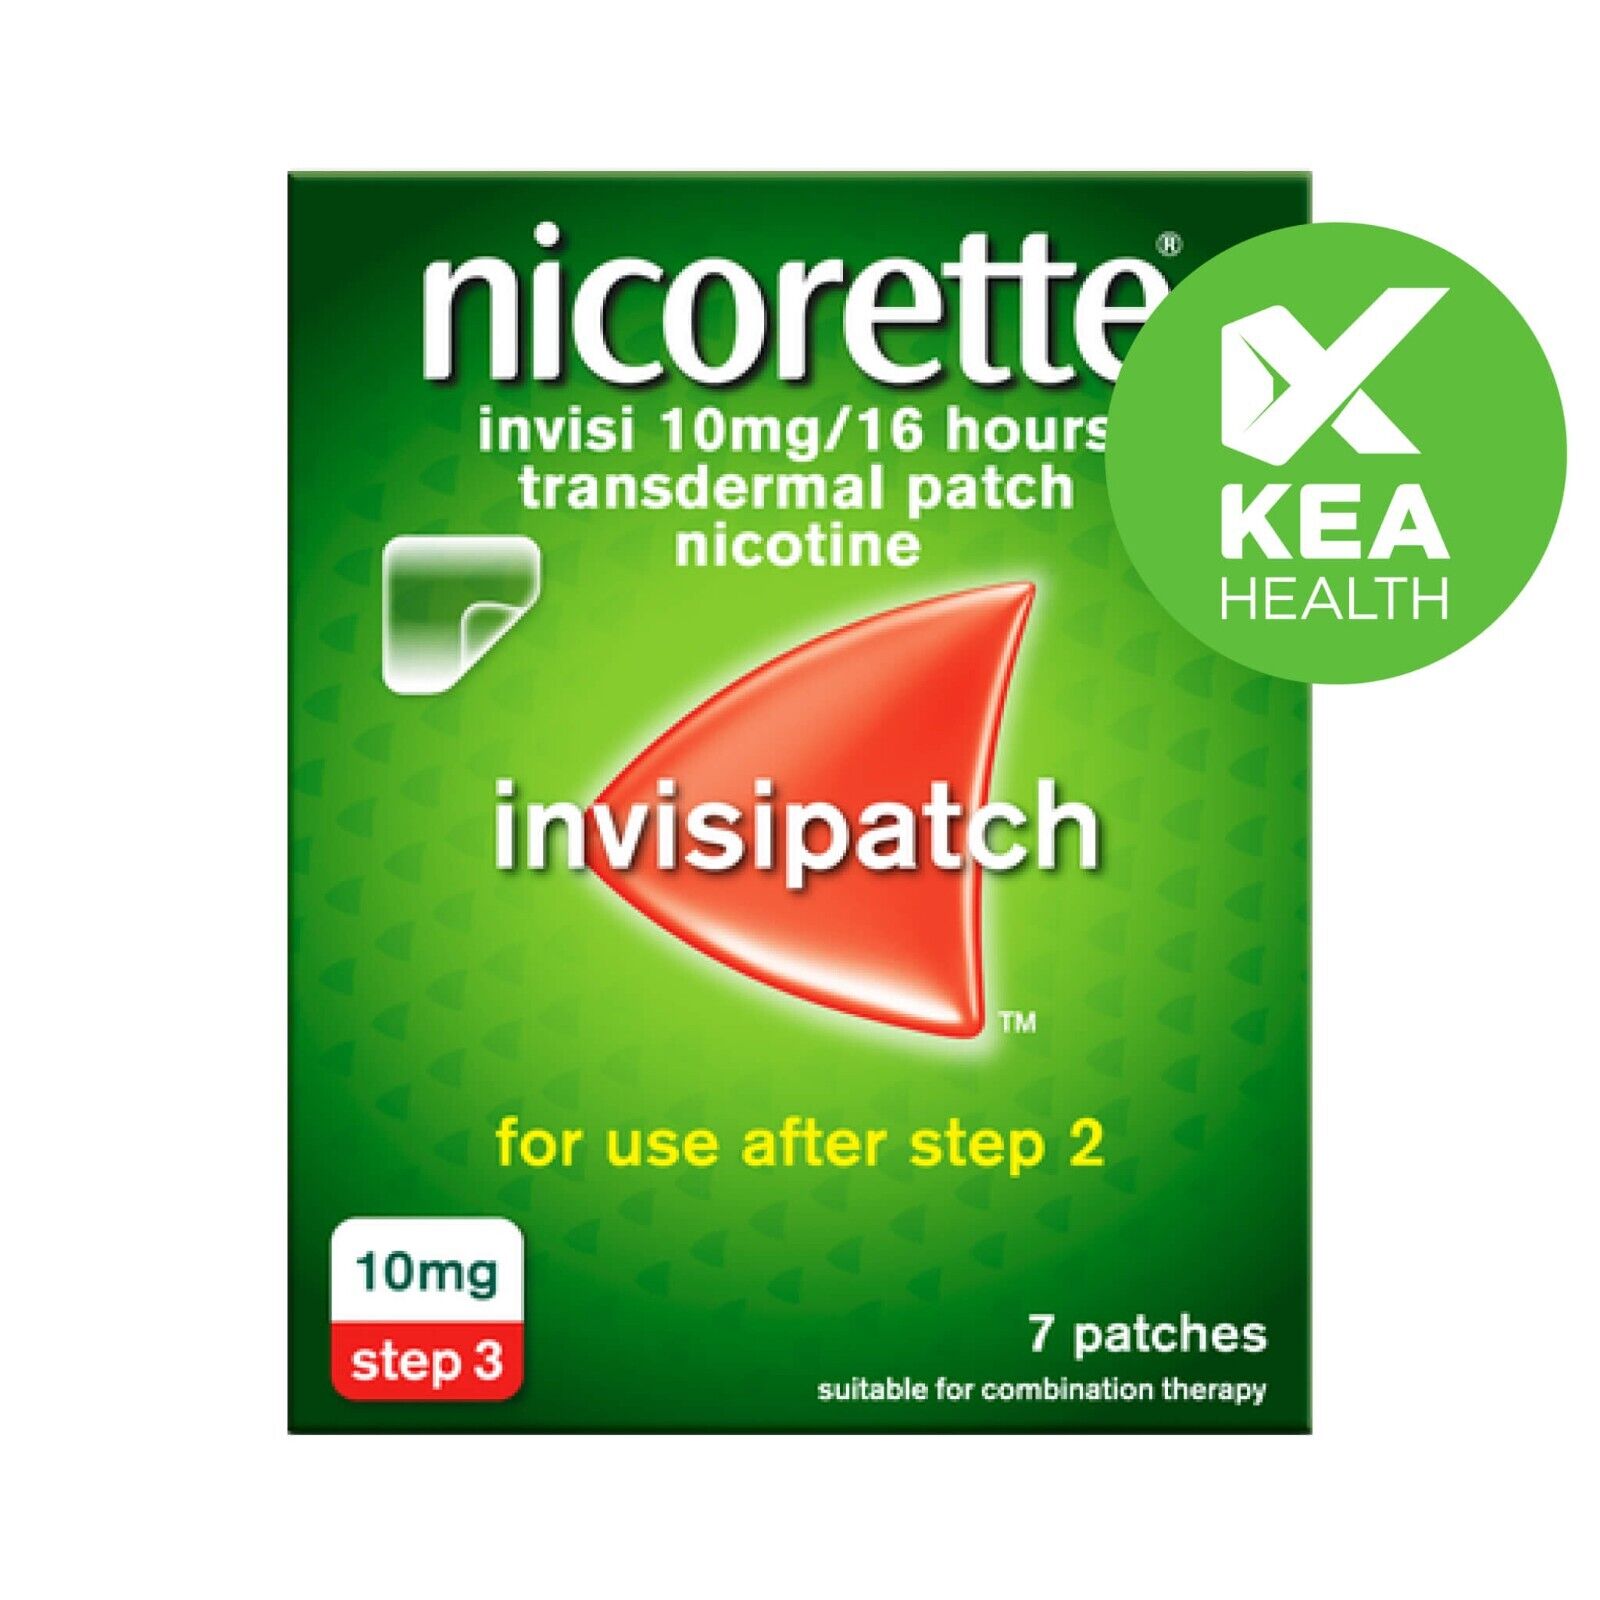 Nicorette Invisipatch Step 3 10mg - 7 Pieces - 1 box - Free US Shipping